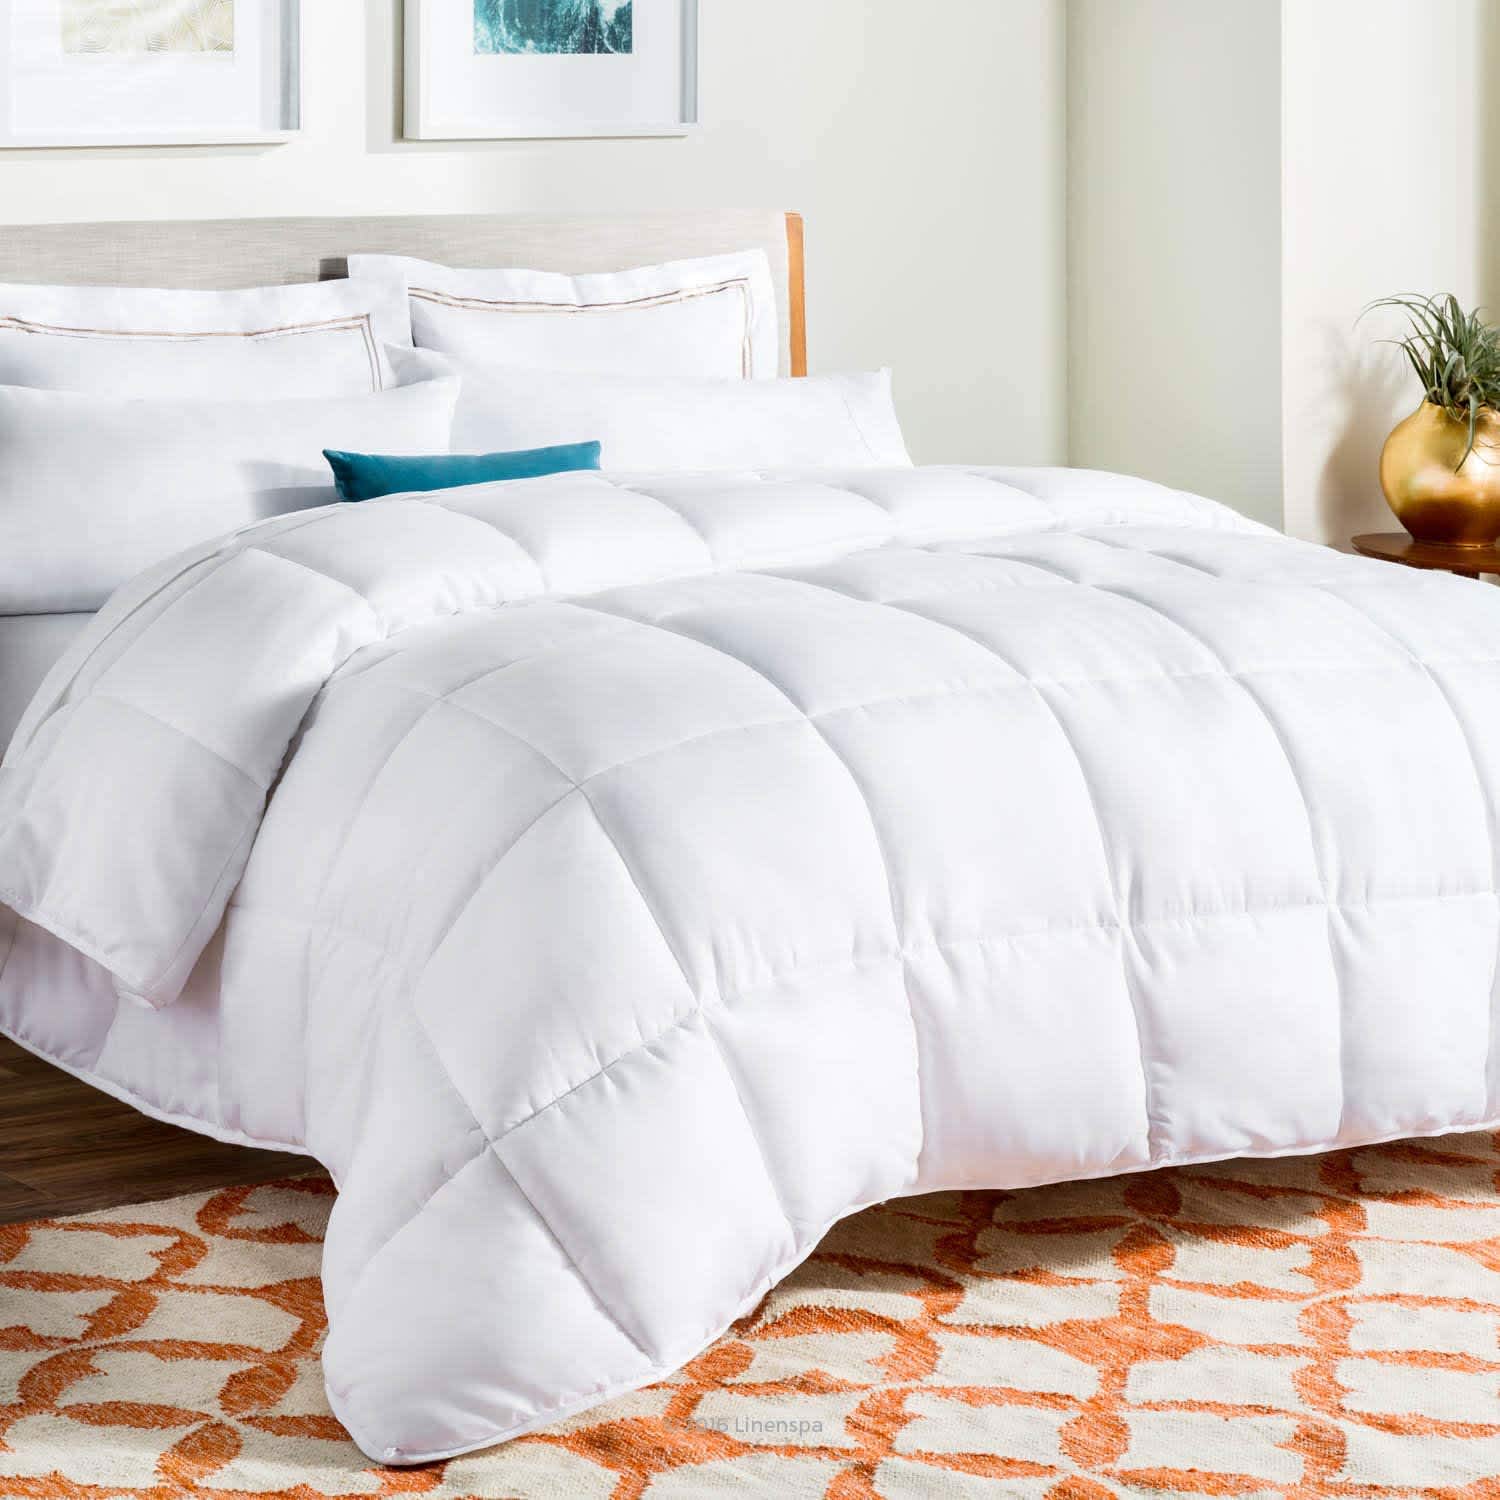 Details about   COHOME Queen 2100 Series Soft Comforter Down Alternative Quilted Duvet Insert wi